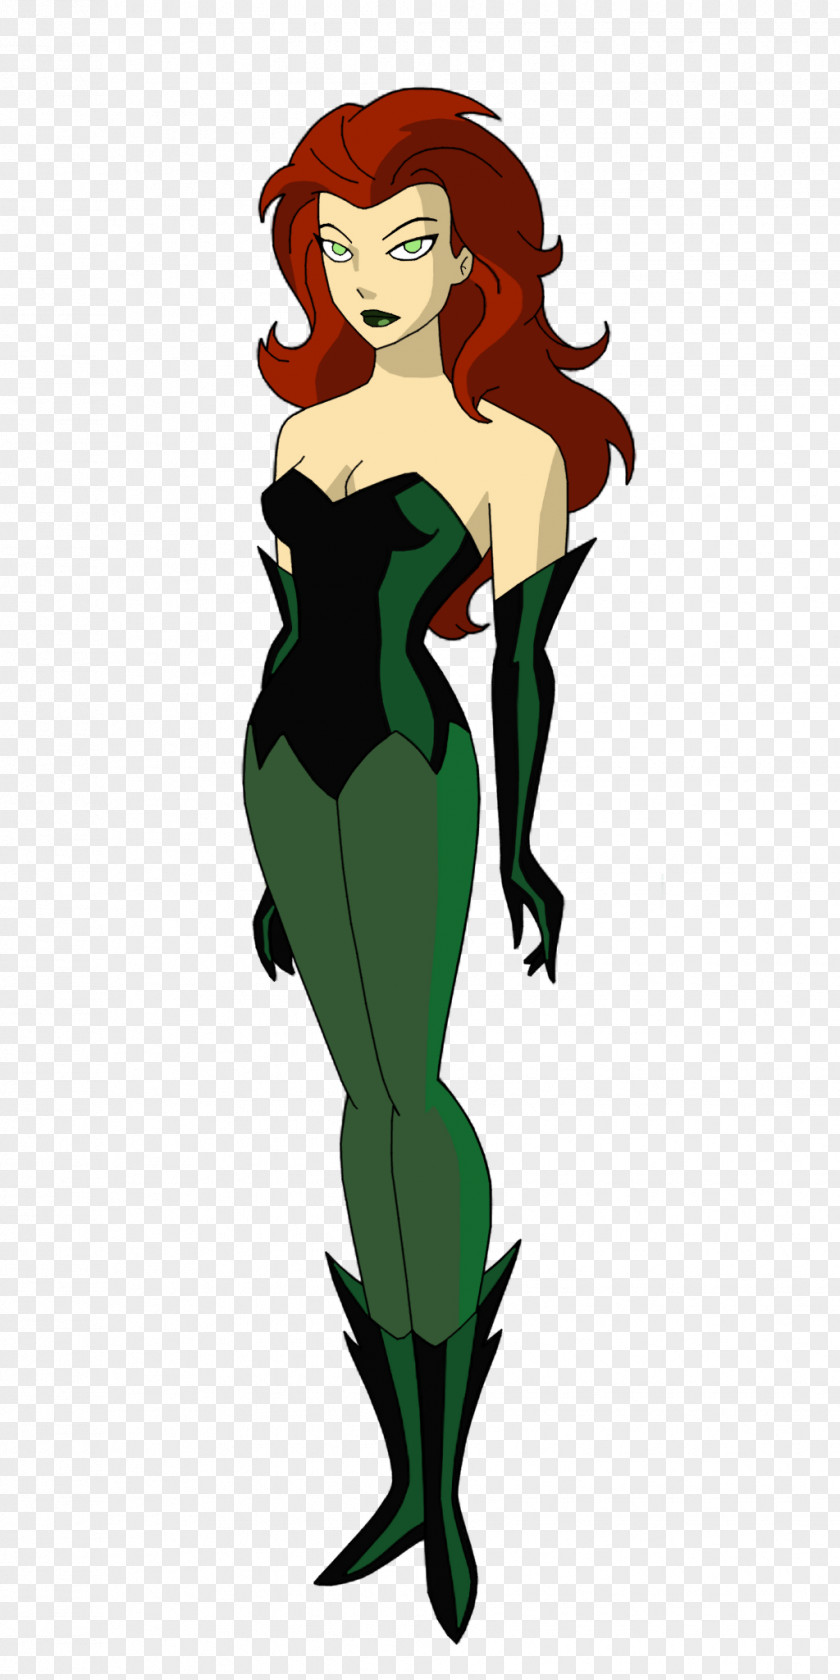 Ivy Poison Batman: The Animated Series Harley Quinn Bruce Timm PNG